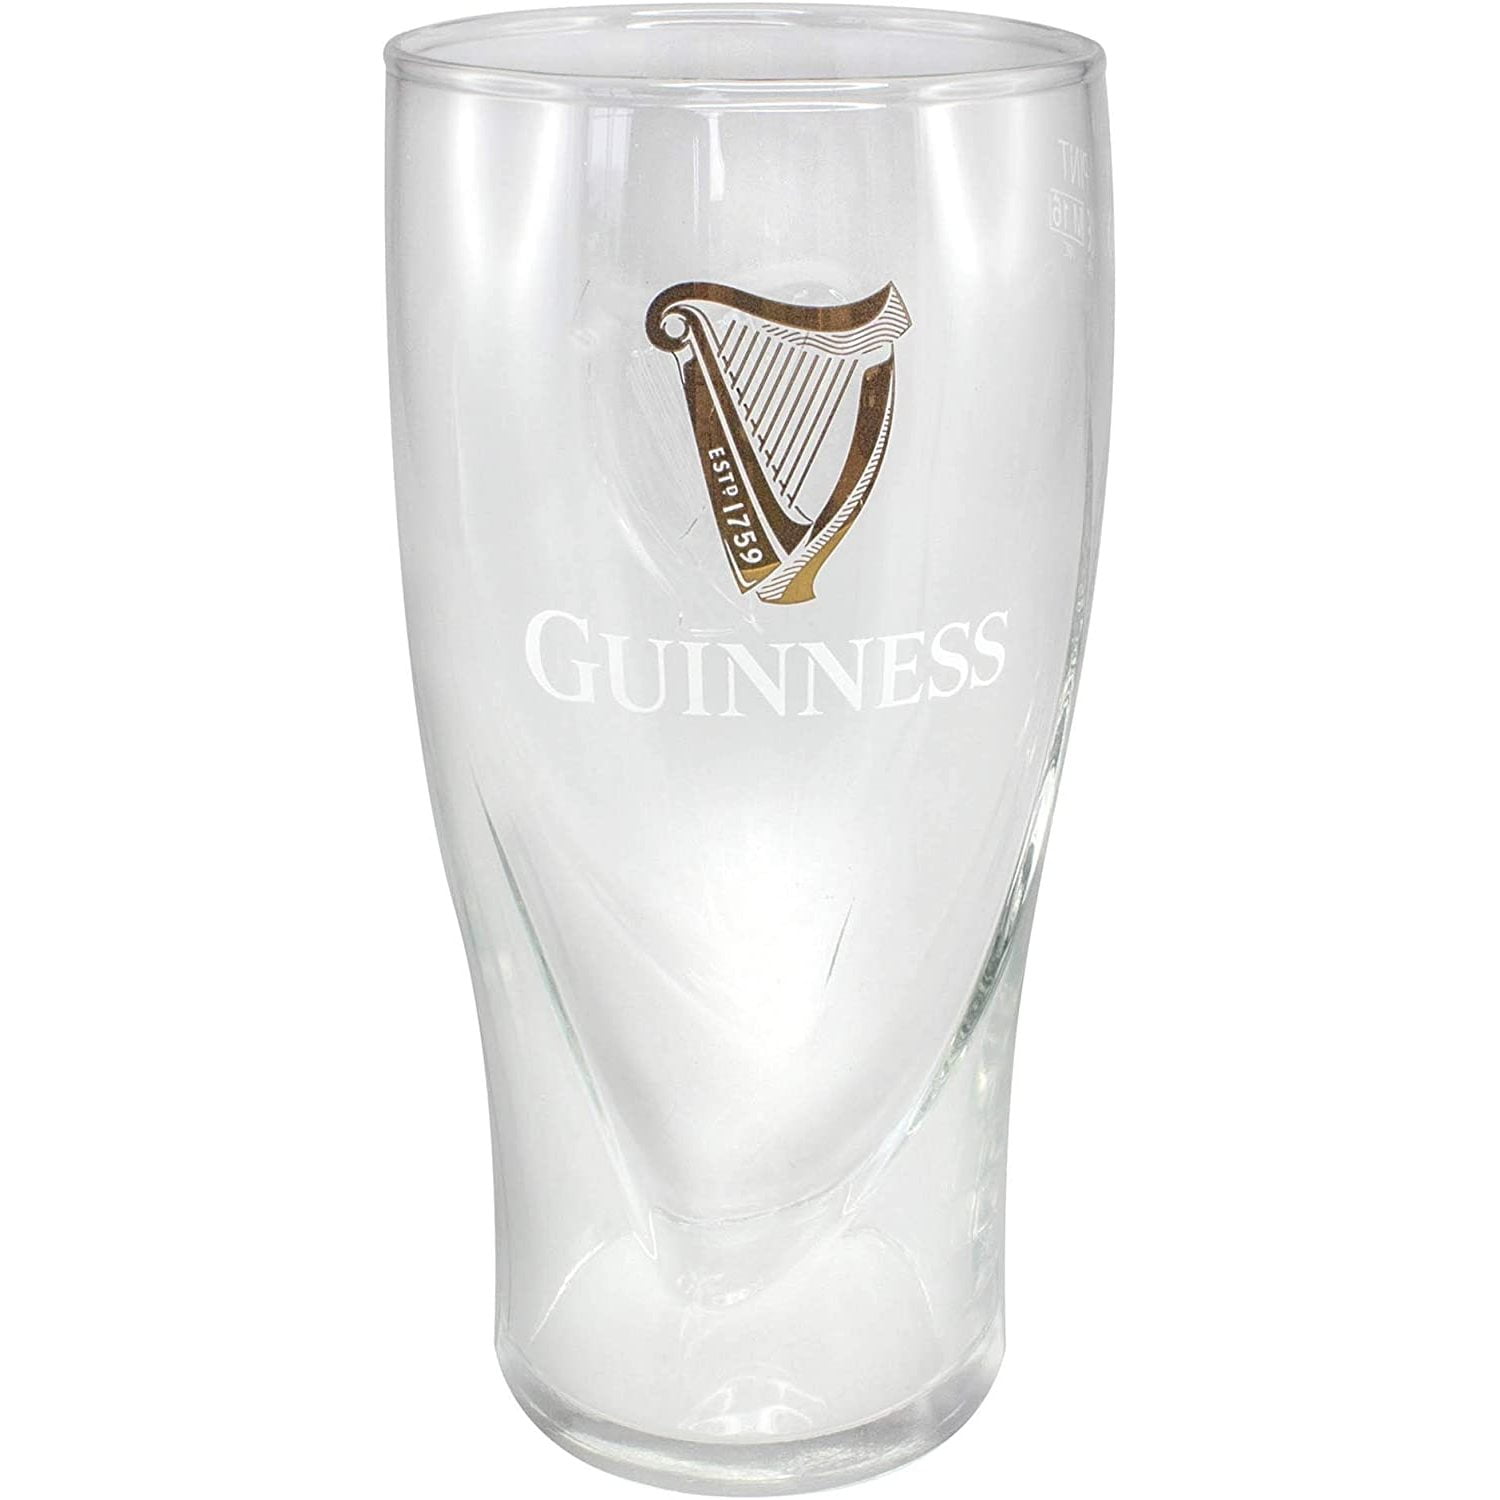 Guinness Pub Glasses, Set of 4: Mixed Drinkware Sets